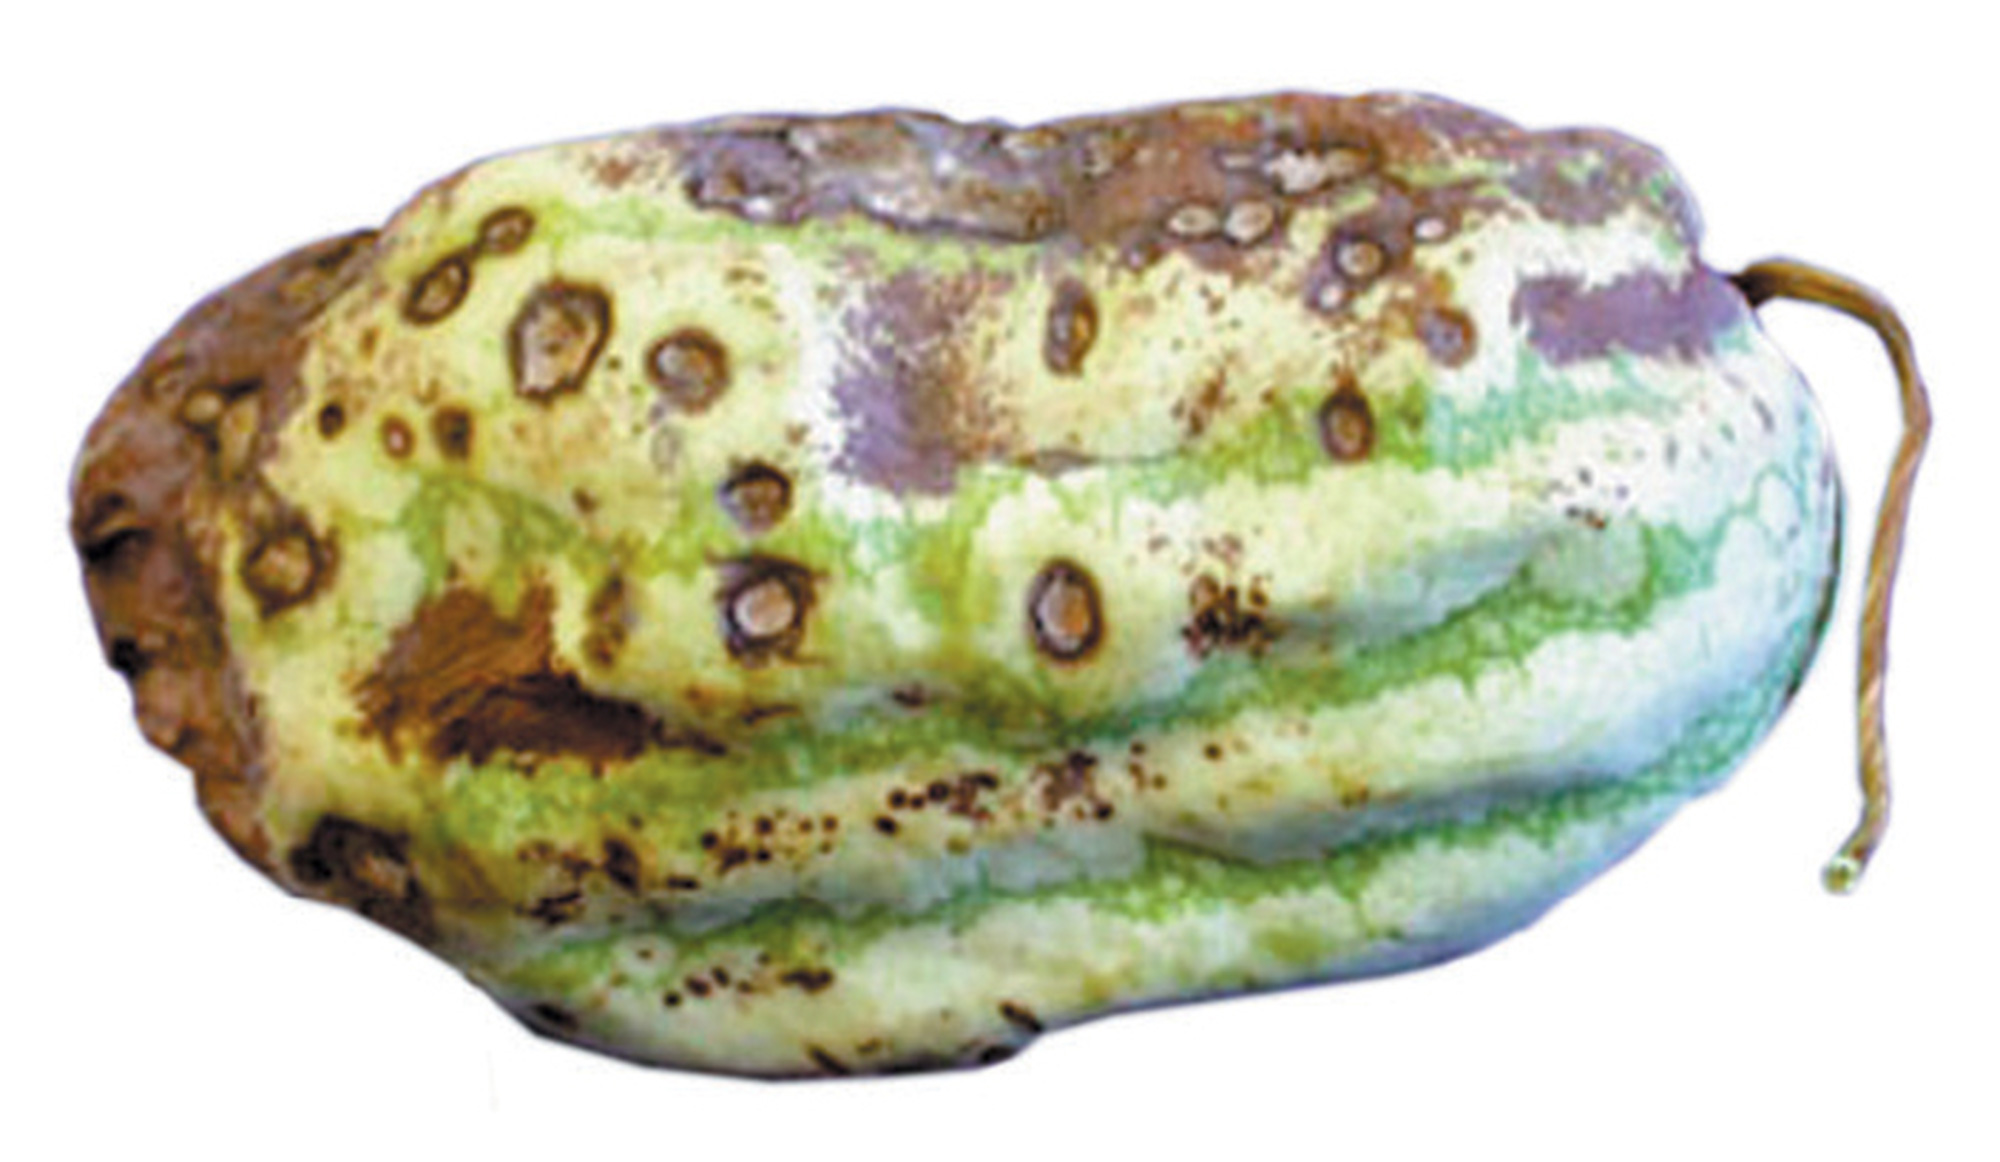 A photograph of a watermelon affected by the fungal disease anthracnose.